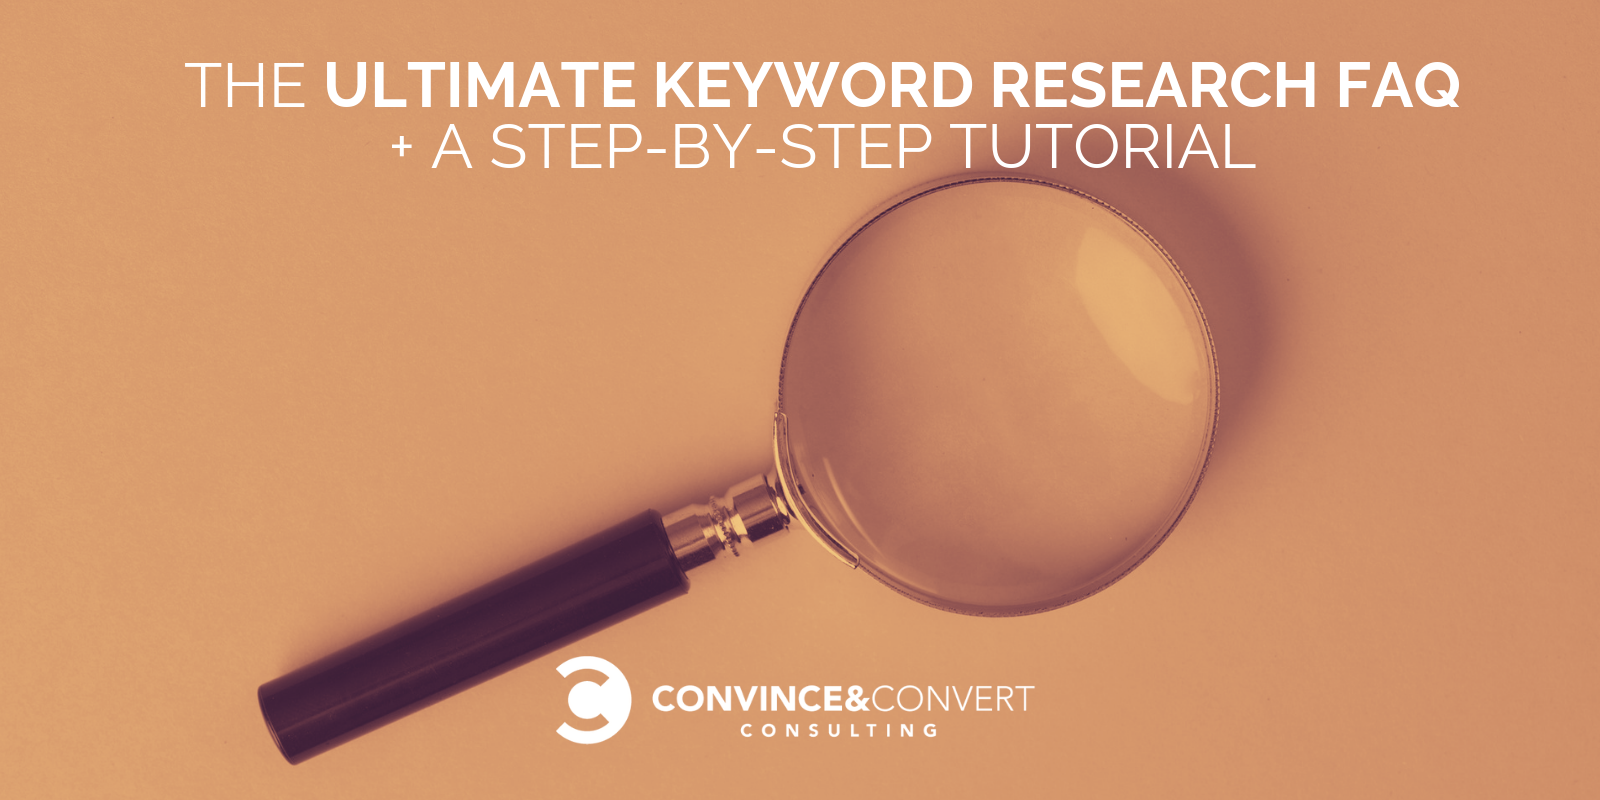 The Ultimate Keyword Research FAQ + a Step-by-Step Tutorial